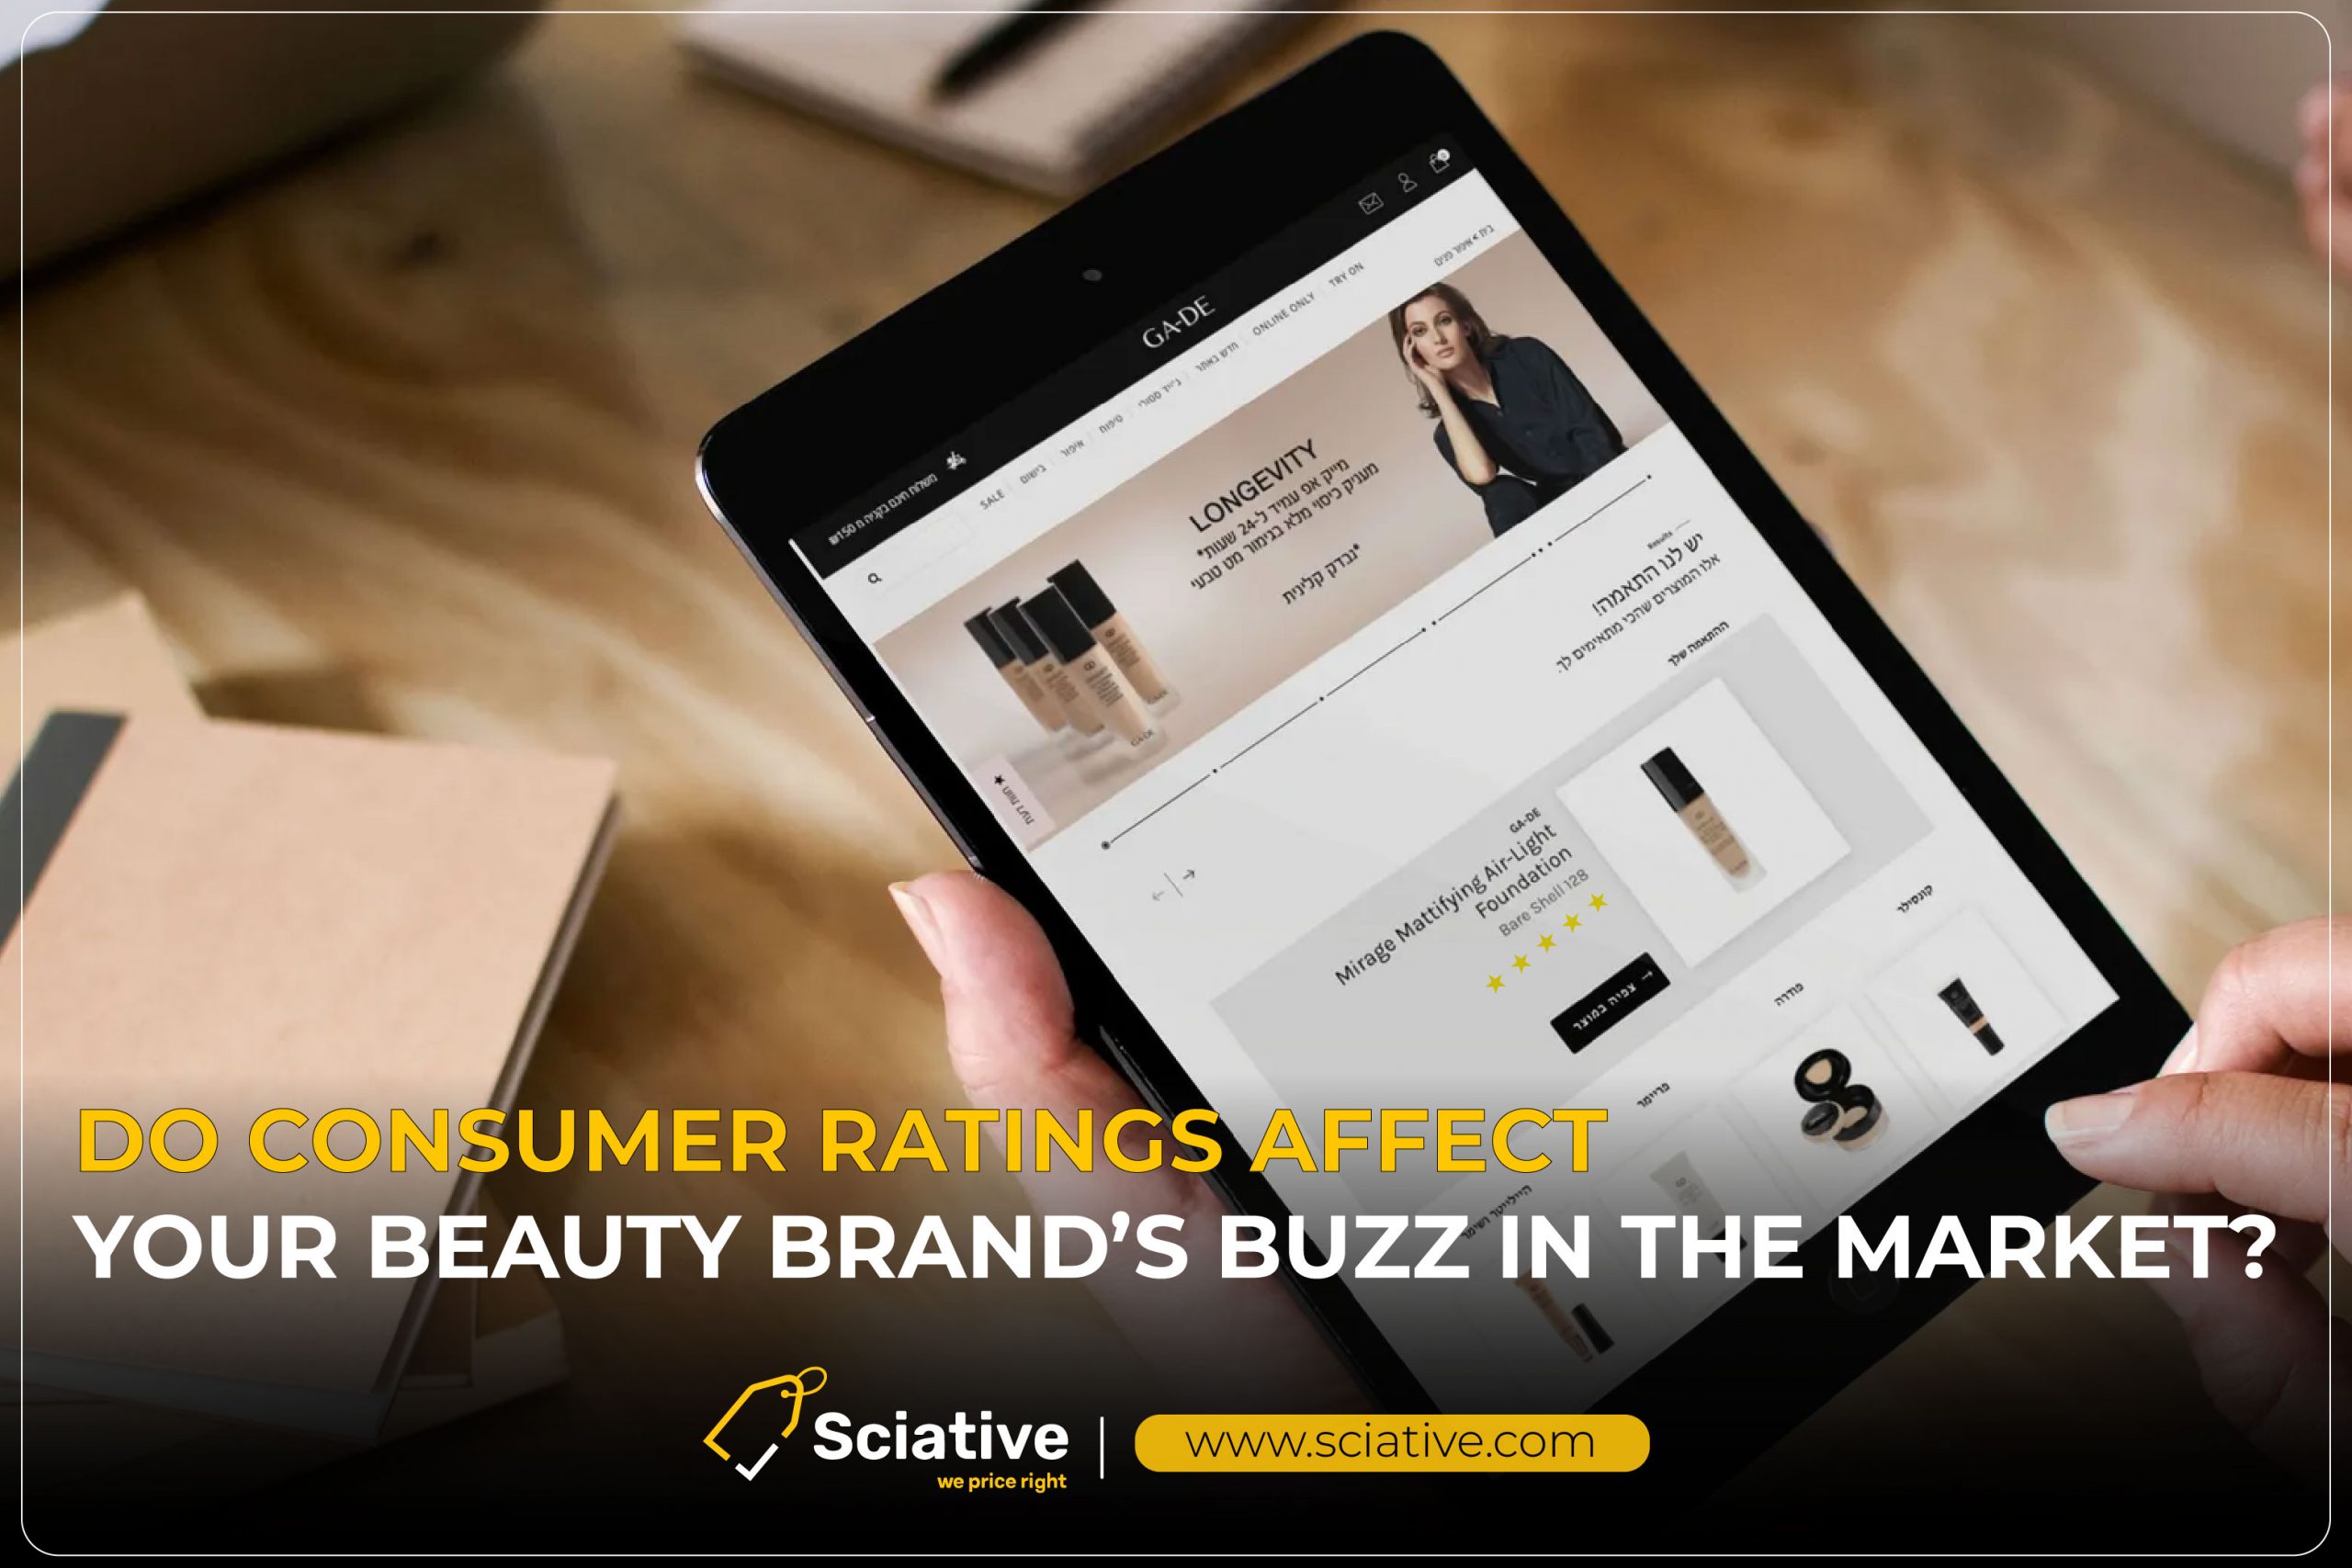 Do consumer ratings affect your beauty brand’s buzz in the market?